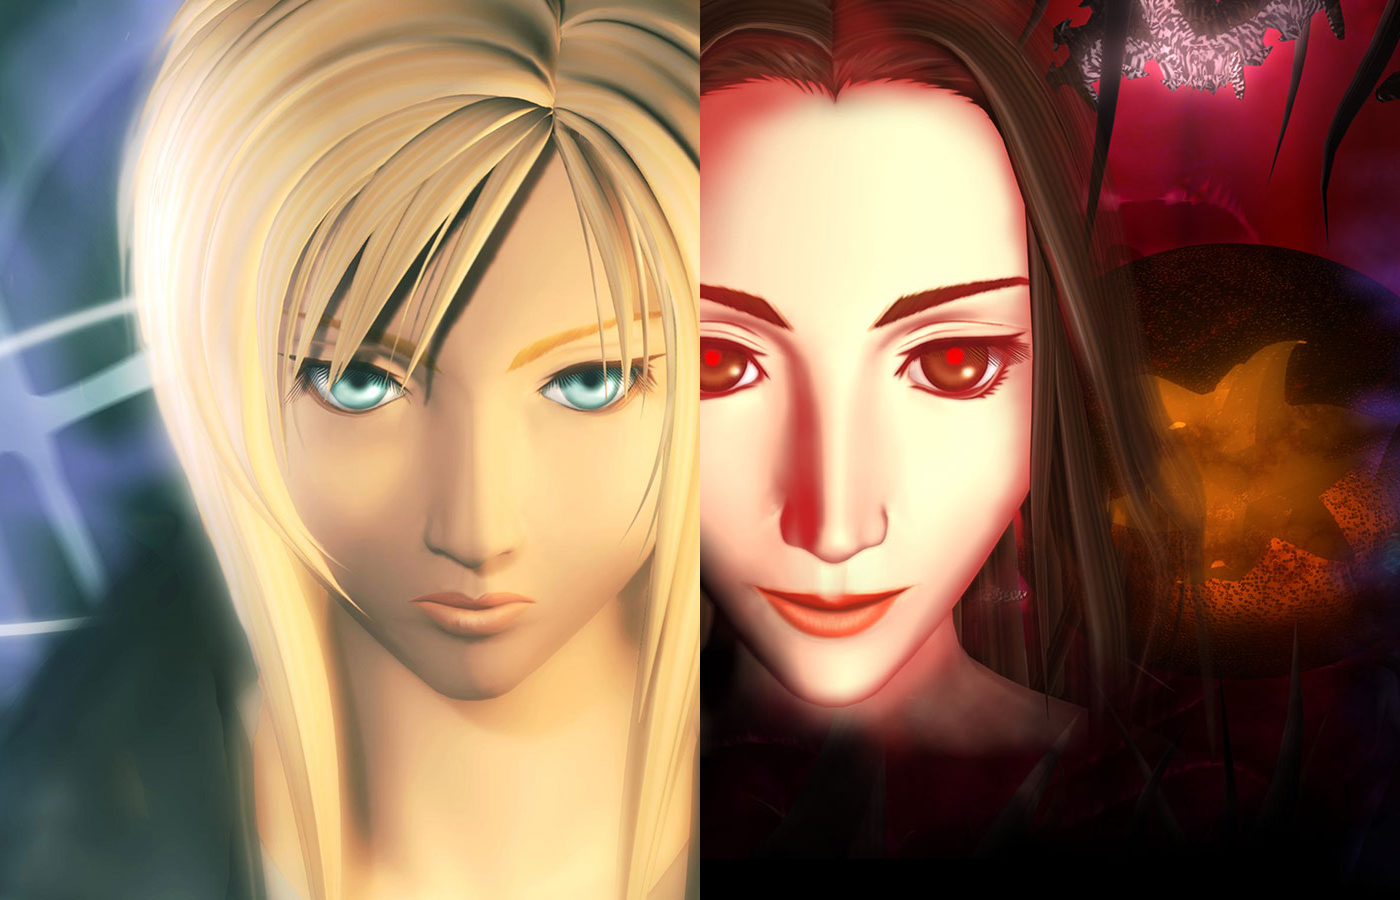 video games based on books - Parasite Eve video game screenshot